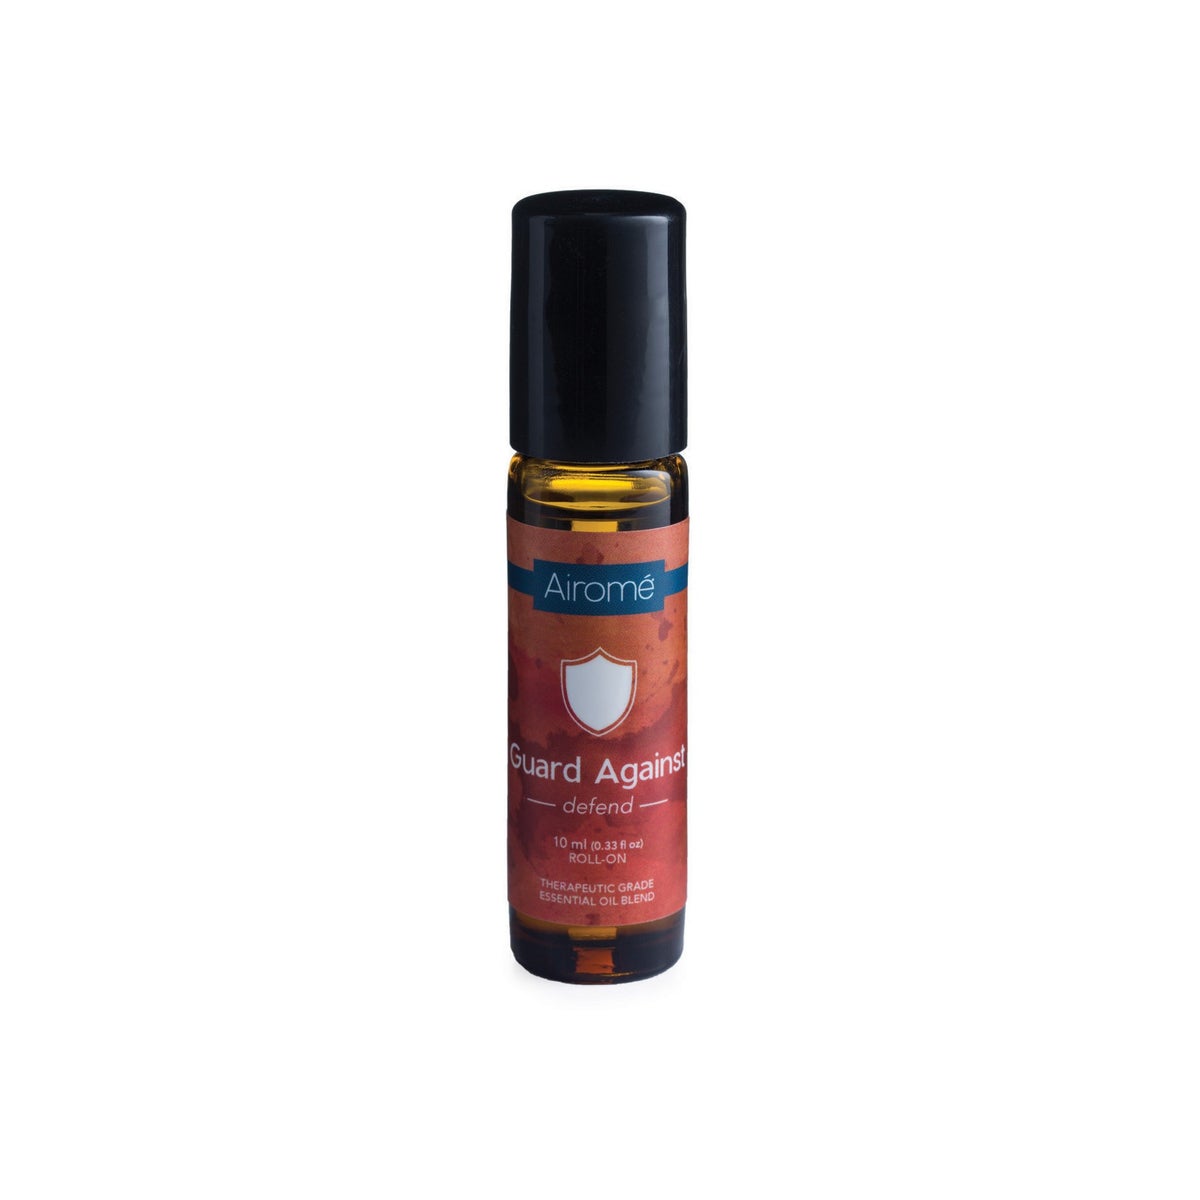 Roll-On Essential Oil Blend 10 ml - Guard Against